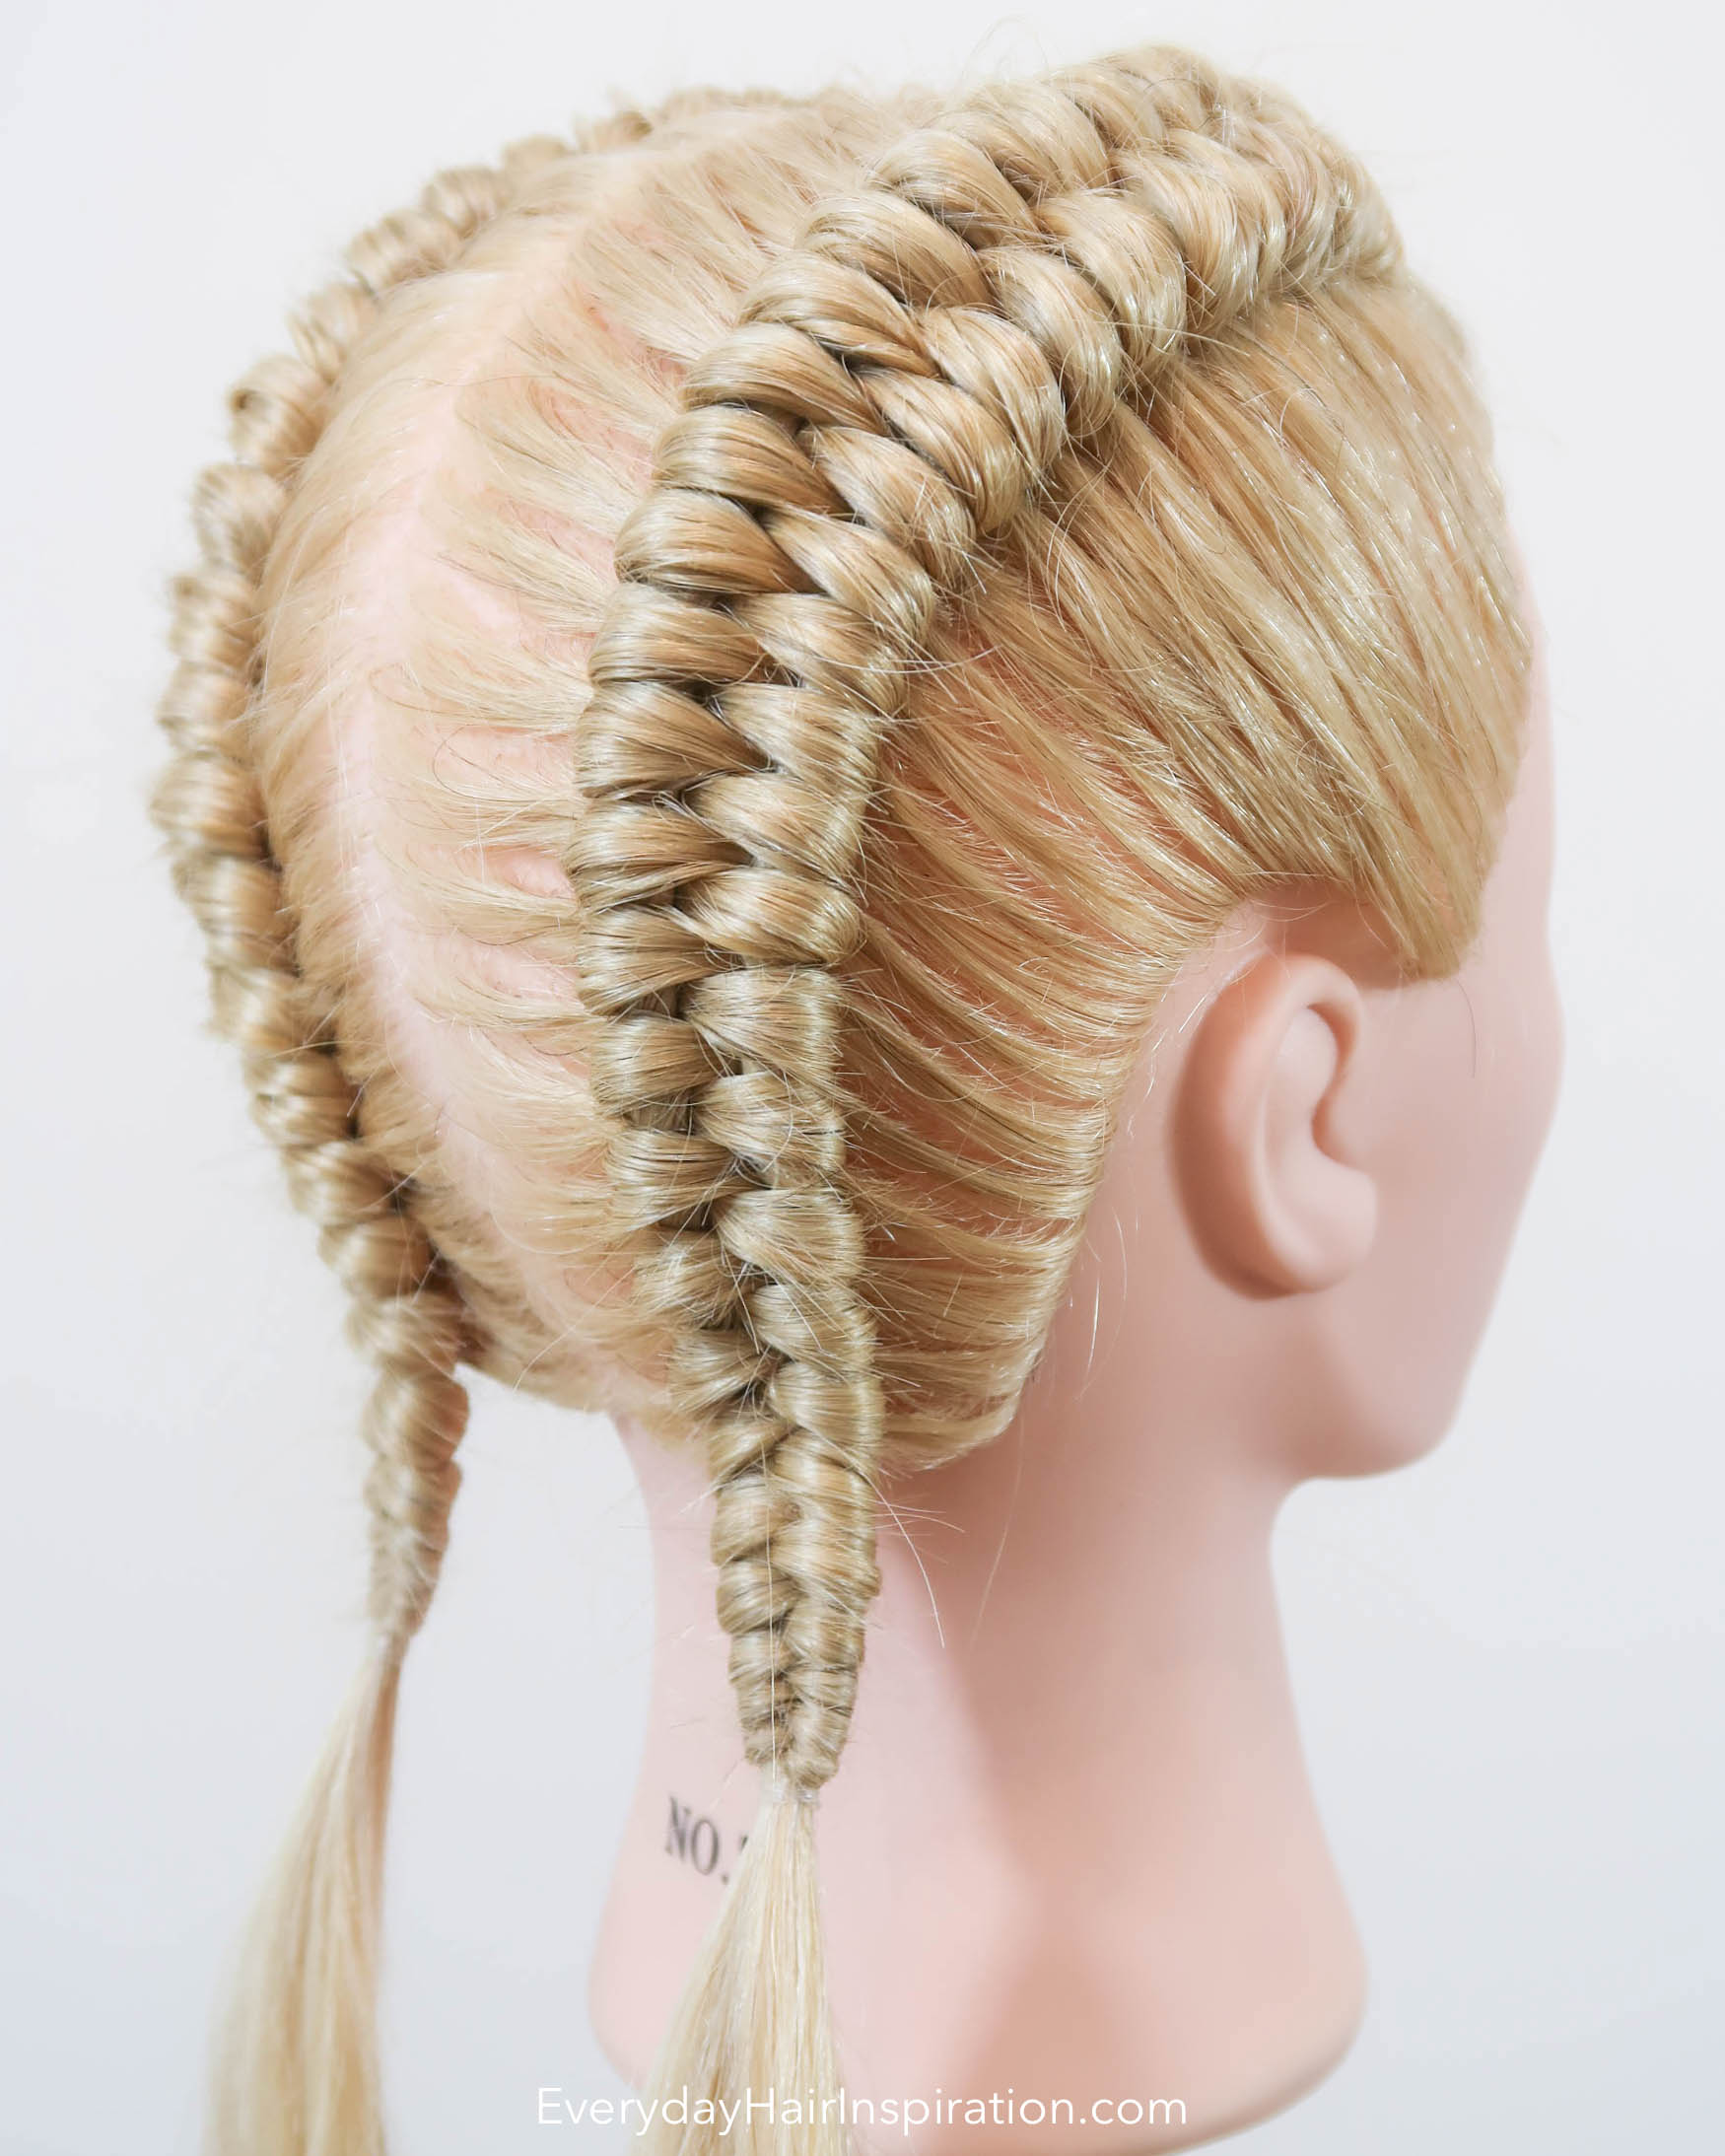 Double Dutch Infinity Braid For Beginners - Everyday Hair inspiration